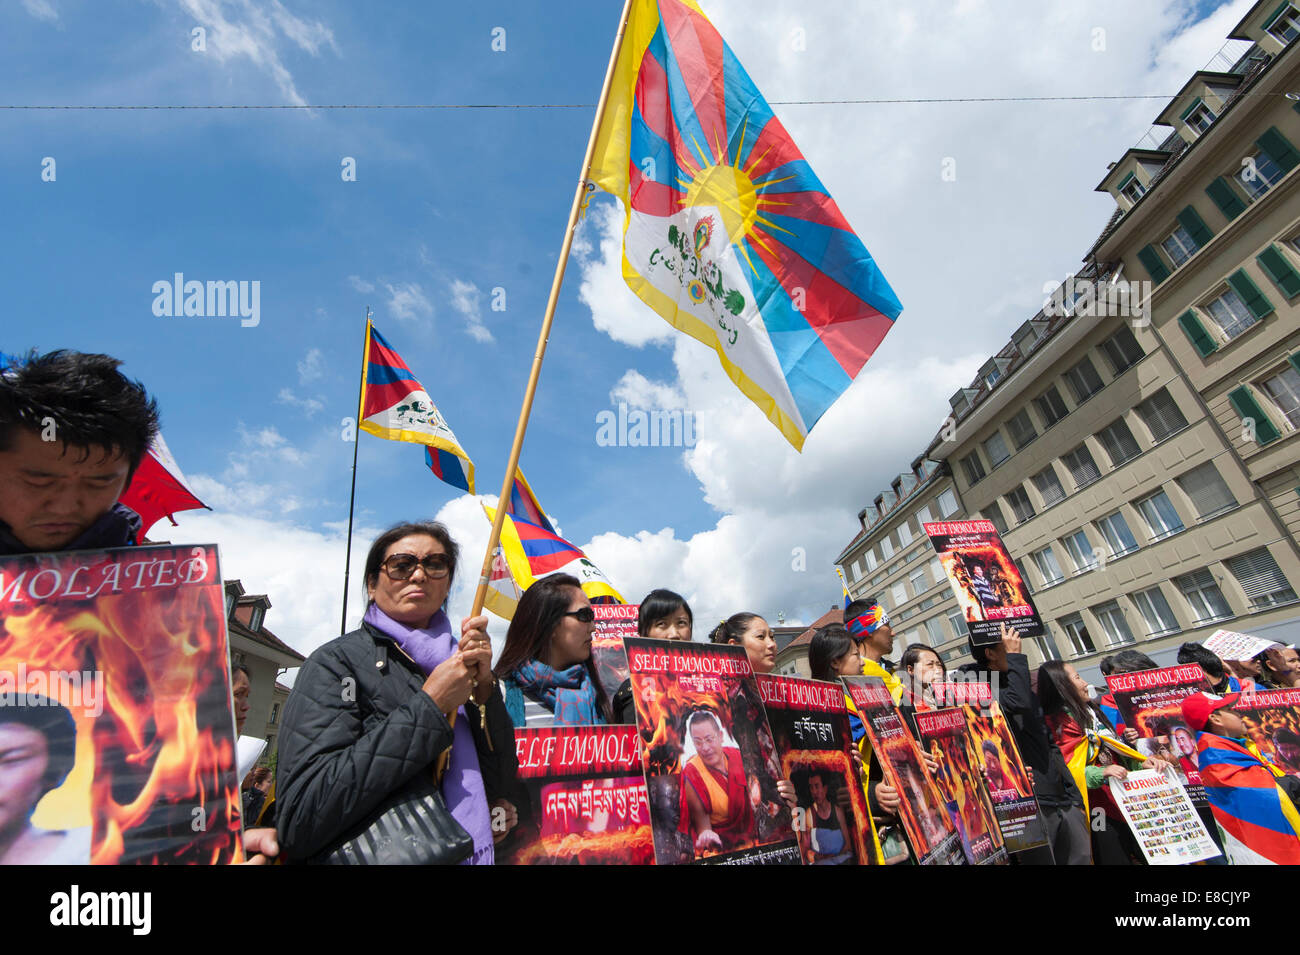 Tibetans are holding up posters and flags at a  protest rally during the visit of China's Premier Li Keqiang in Bern,Switzerland Stock Photo